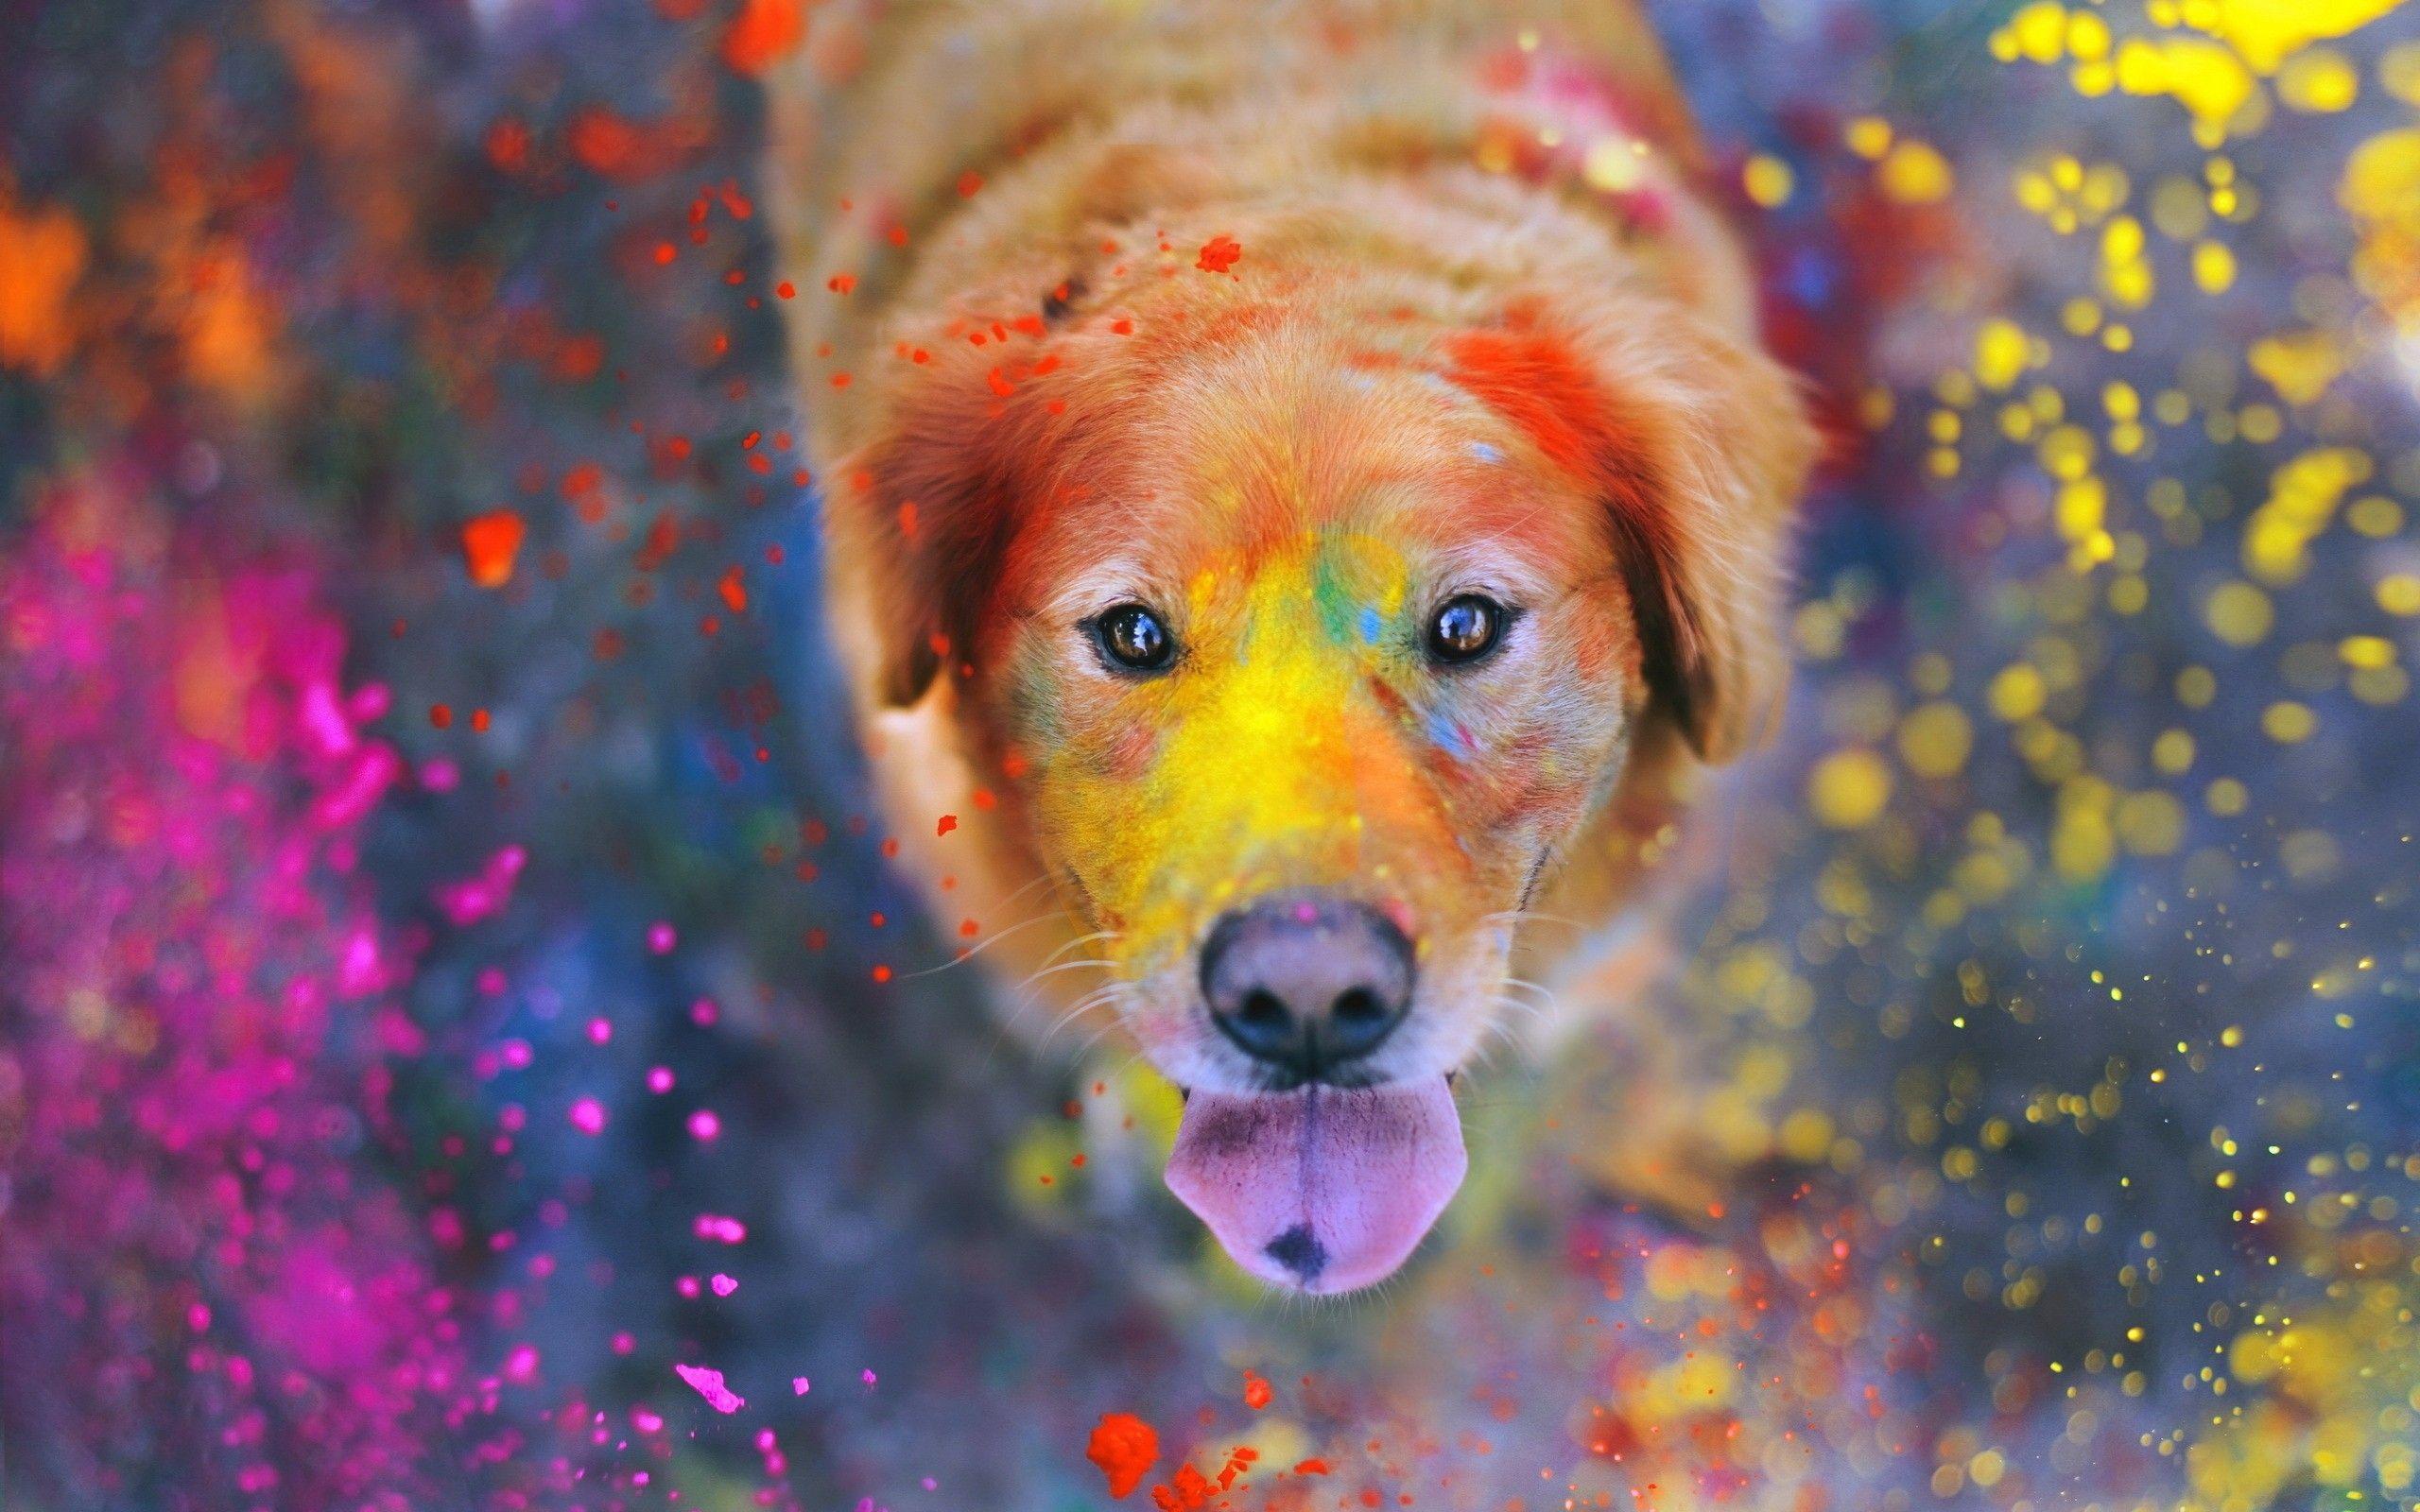 Download Wallpaper 2560x1600 Dogs, Paint, Spray, Face 2560x1600 HD